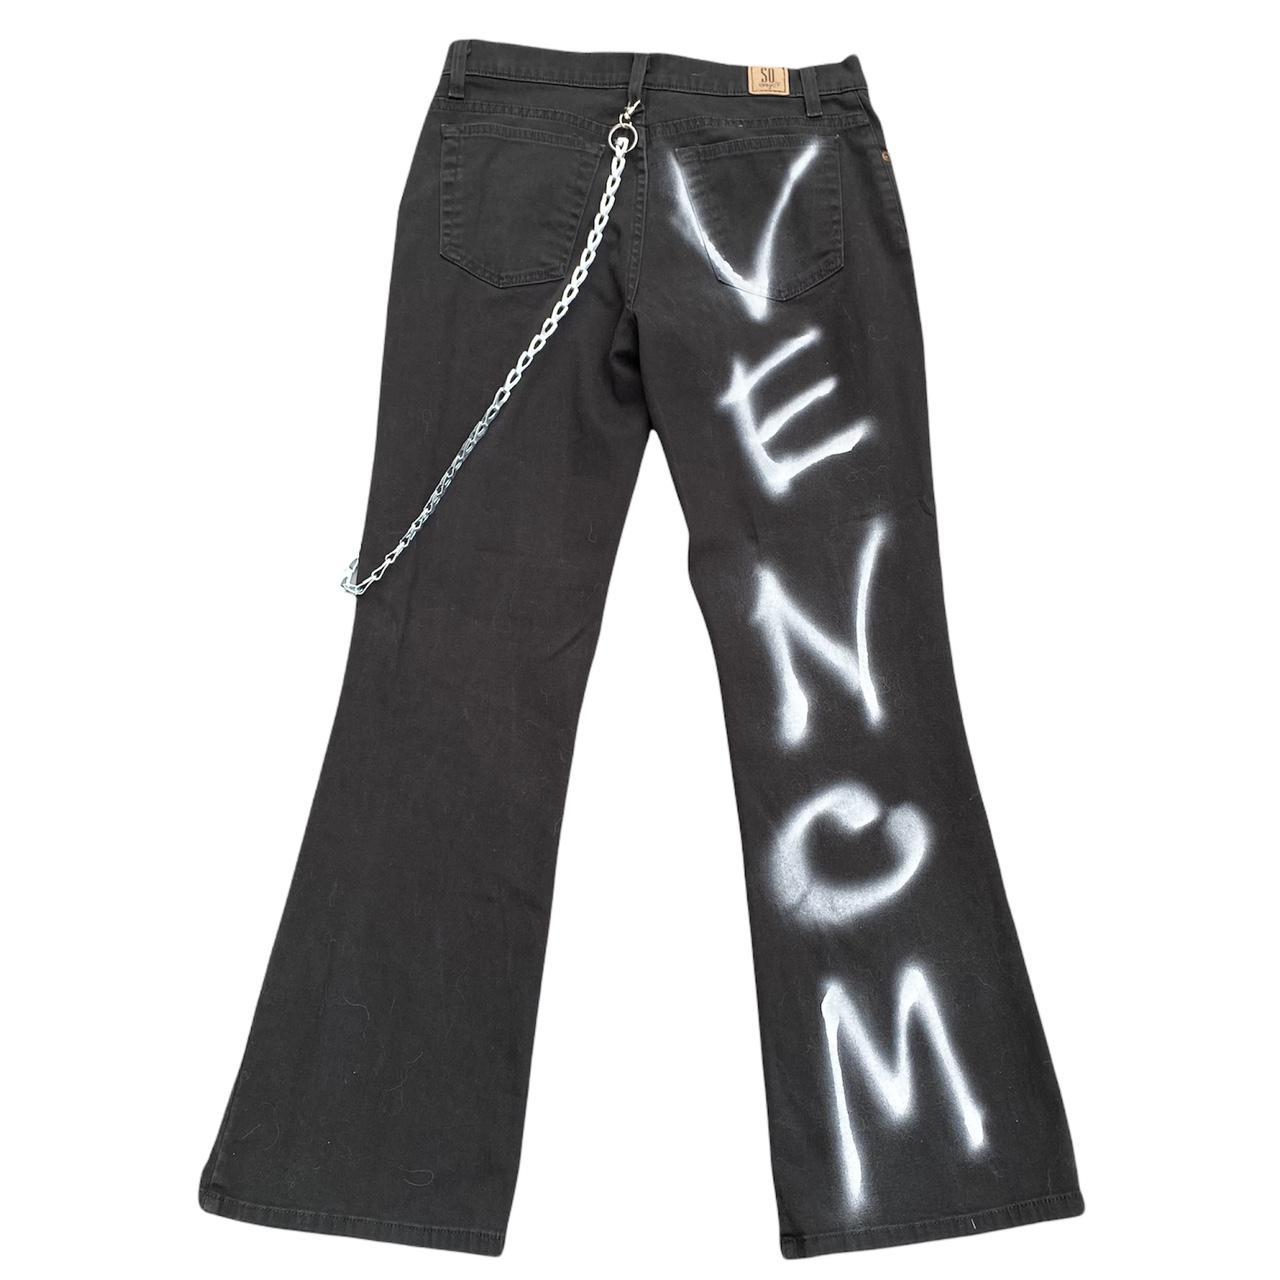 Product Image 1 - 🕸The Mall Goth pants🕸
hand customized